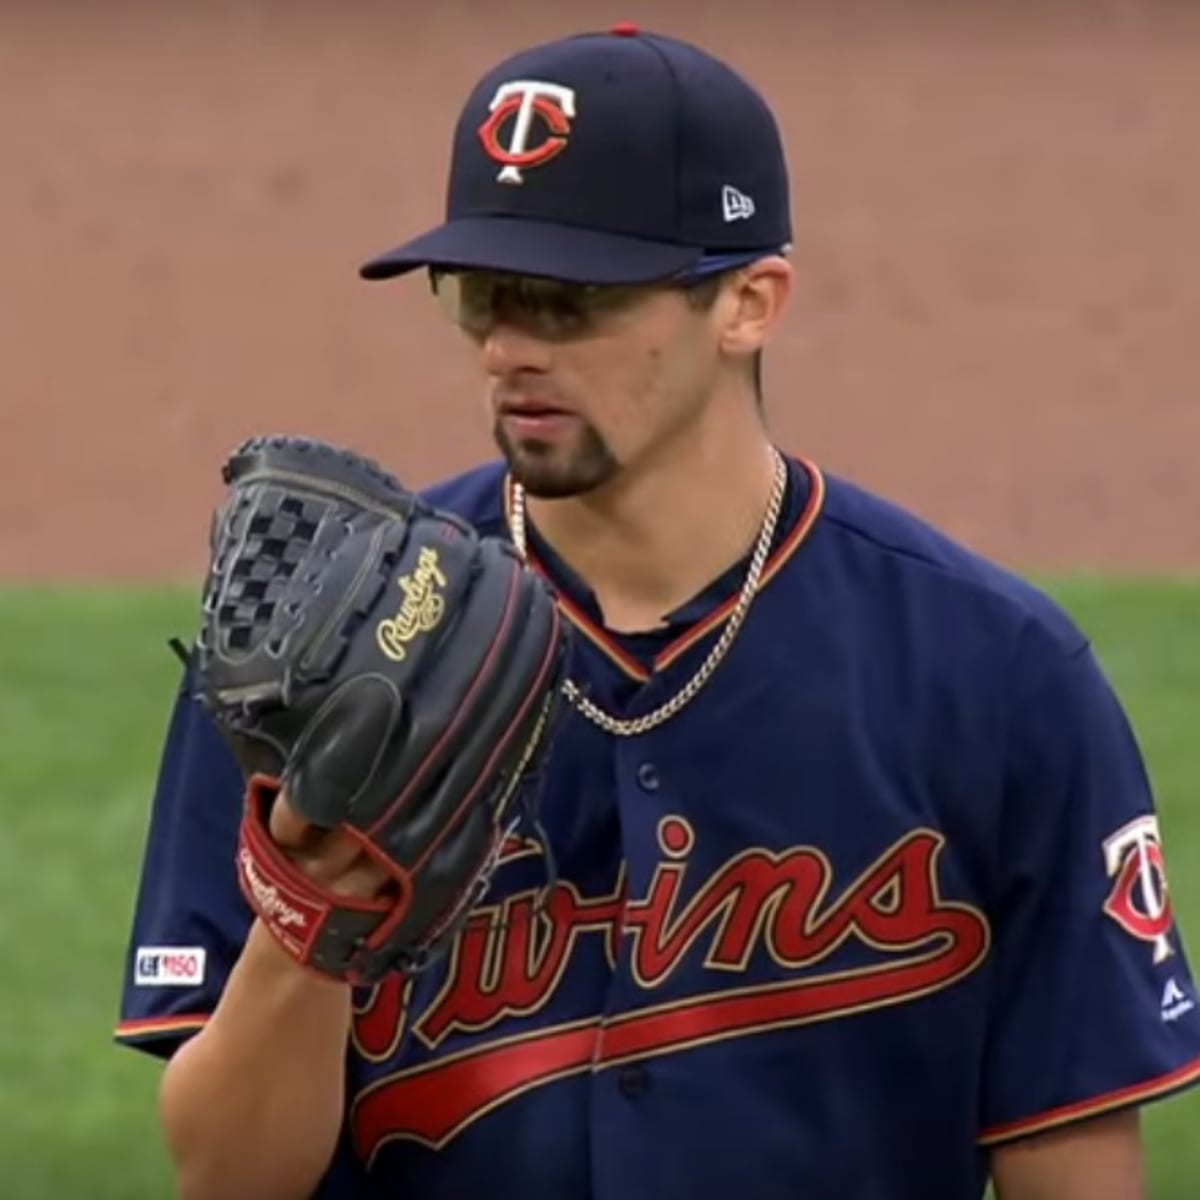 Grading the 2020 Twins: José Berríos dropped to #2 in the rotation